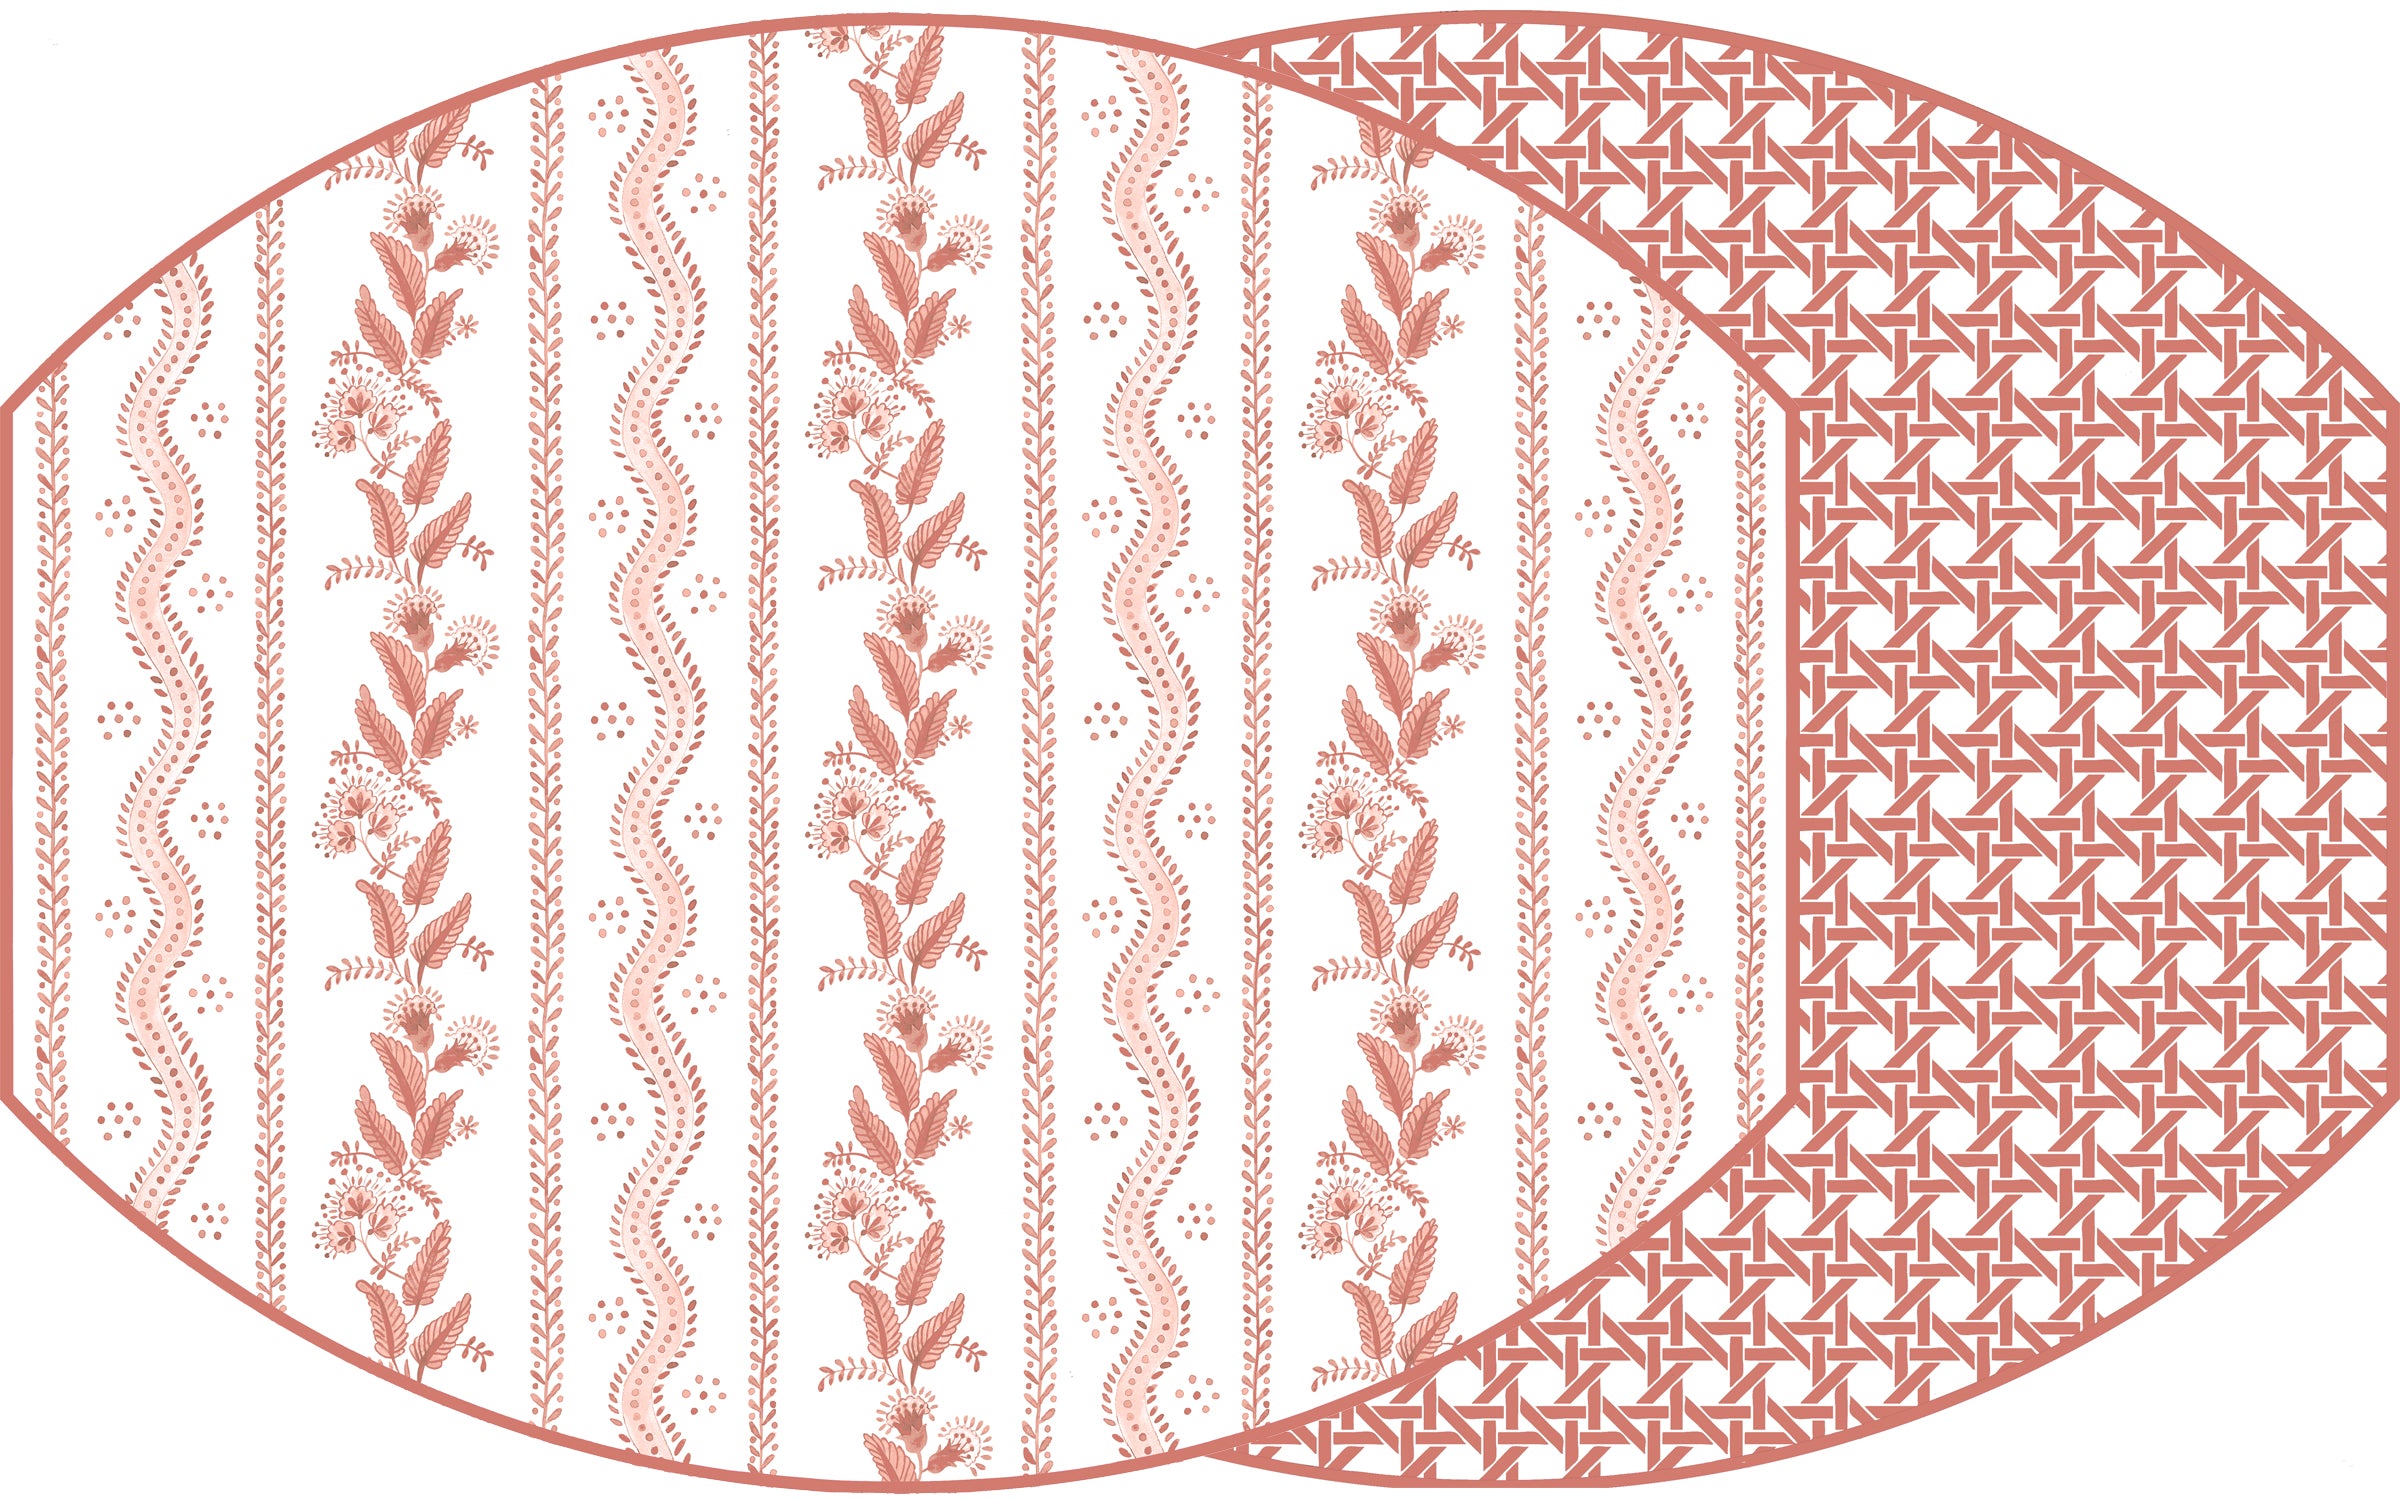 ELLIPSE TWO SIDED EMMA & CANE PLACEMATS